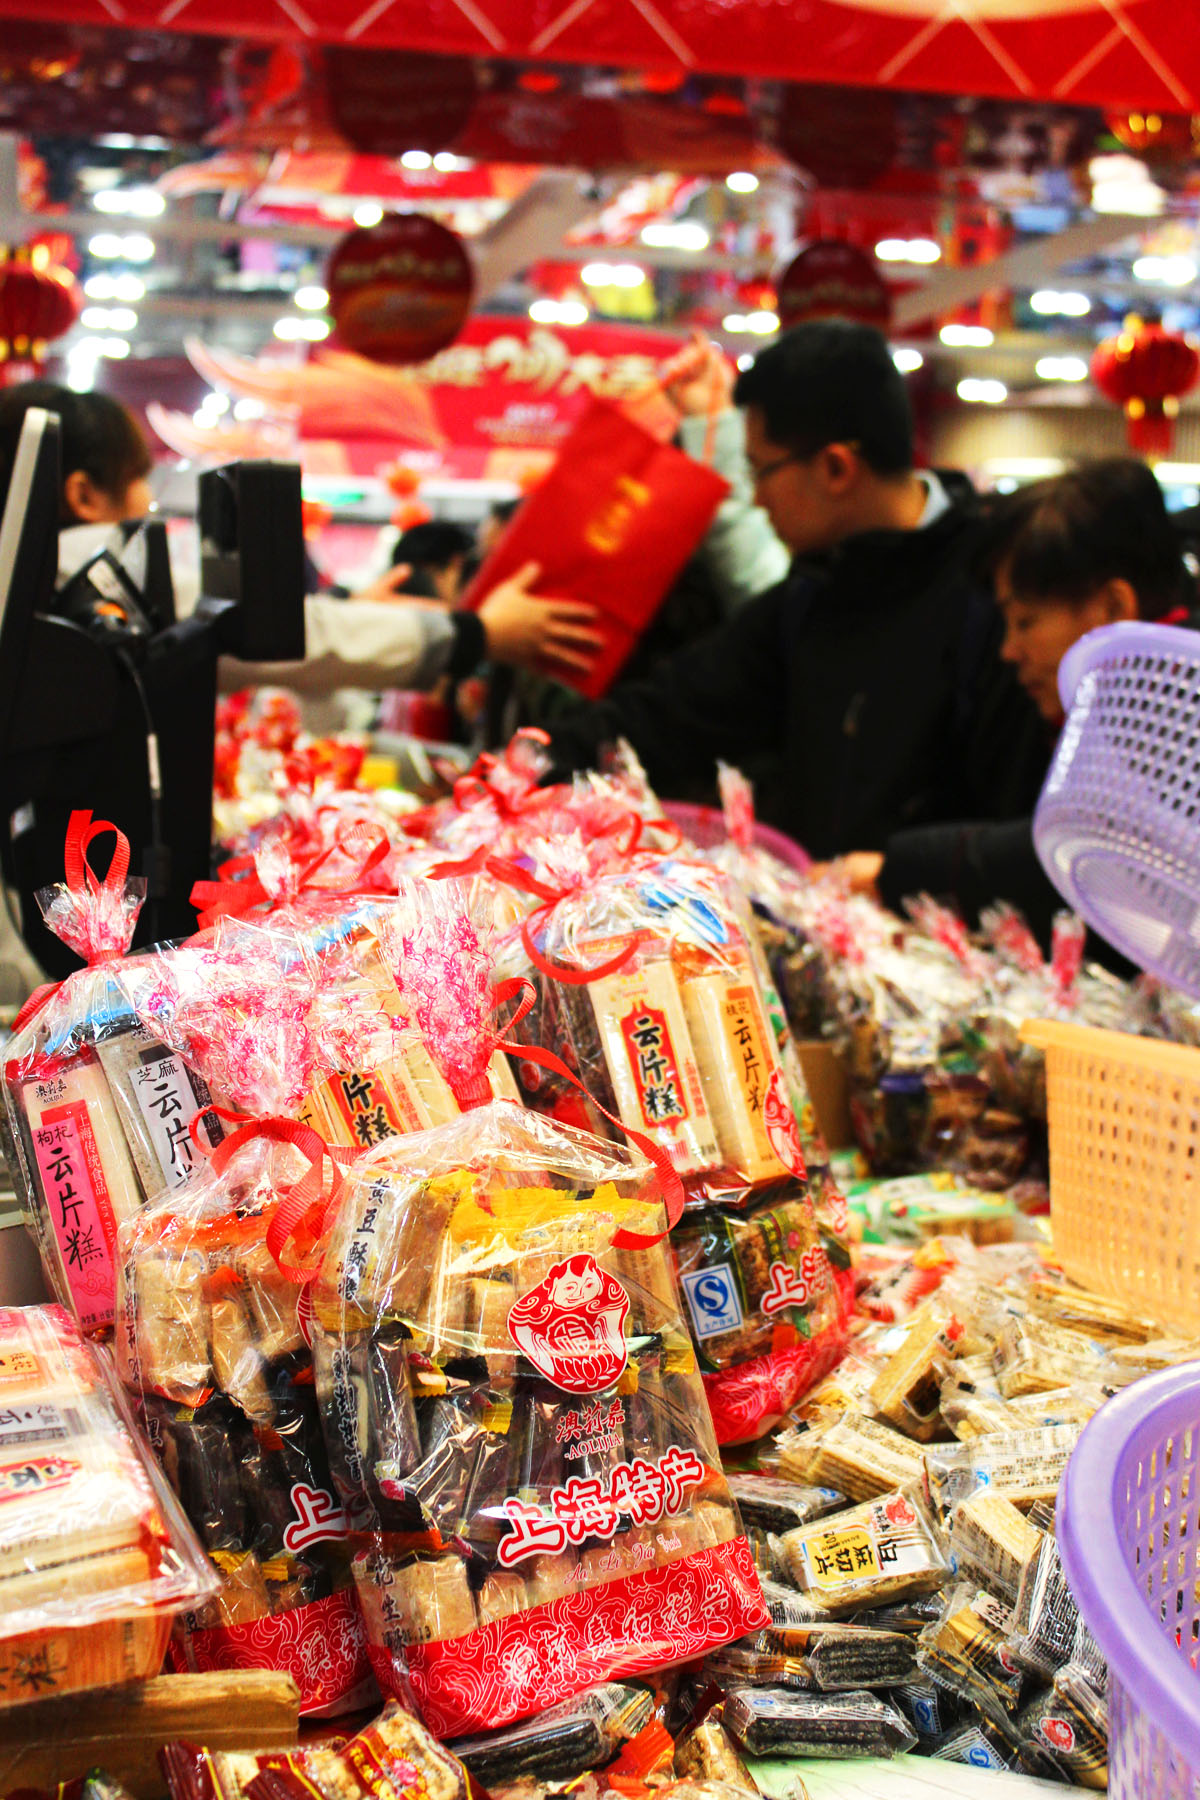 Buying trafitional Chinese New Year sweets, cakes and biscuits to share with the office when I return from my holiday to China